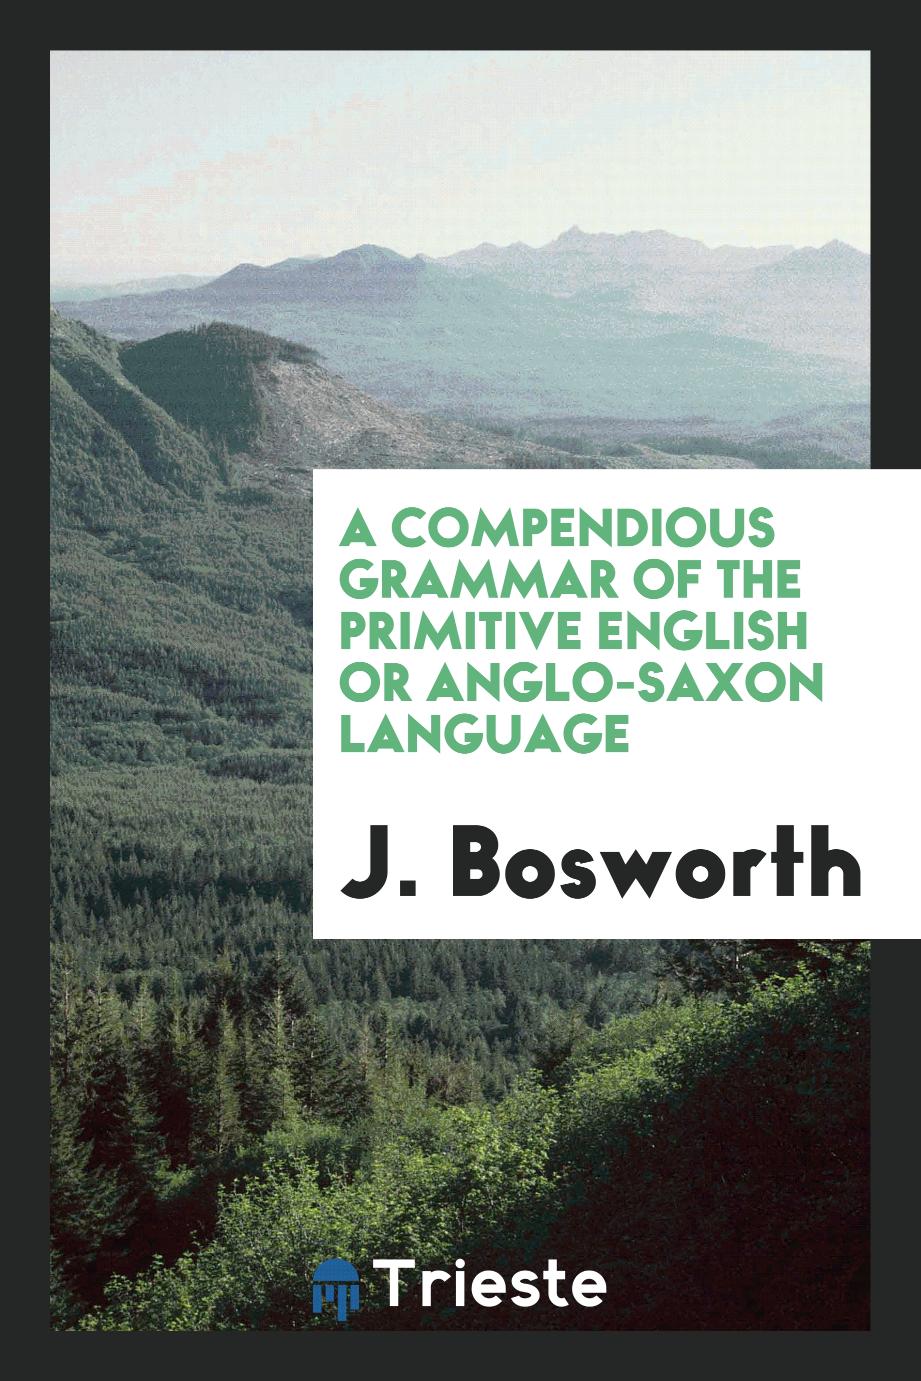 A Compendious Grammar of the Primitive English Or Anglo-Saxon Language